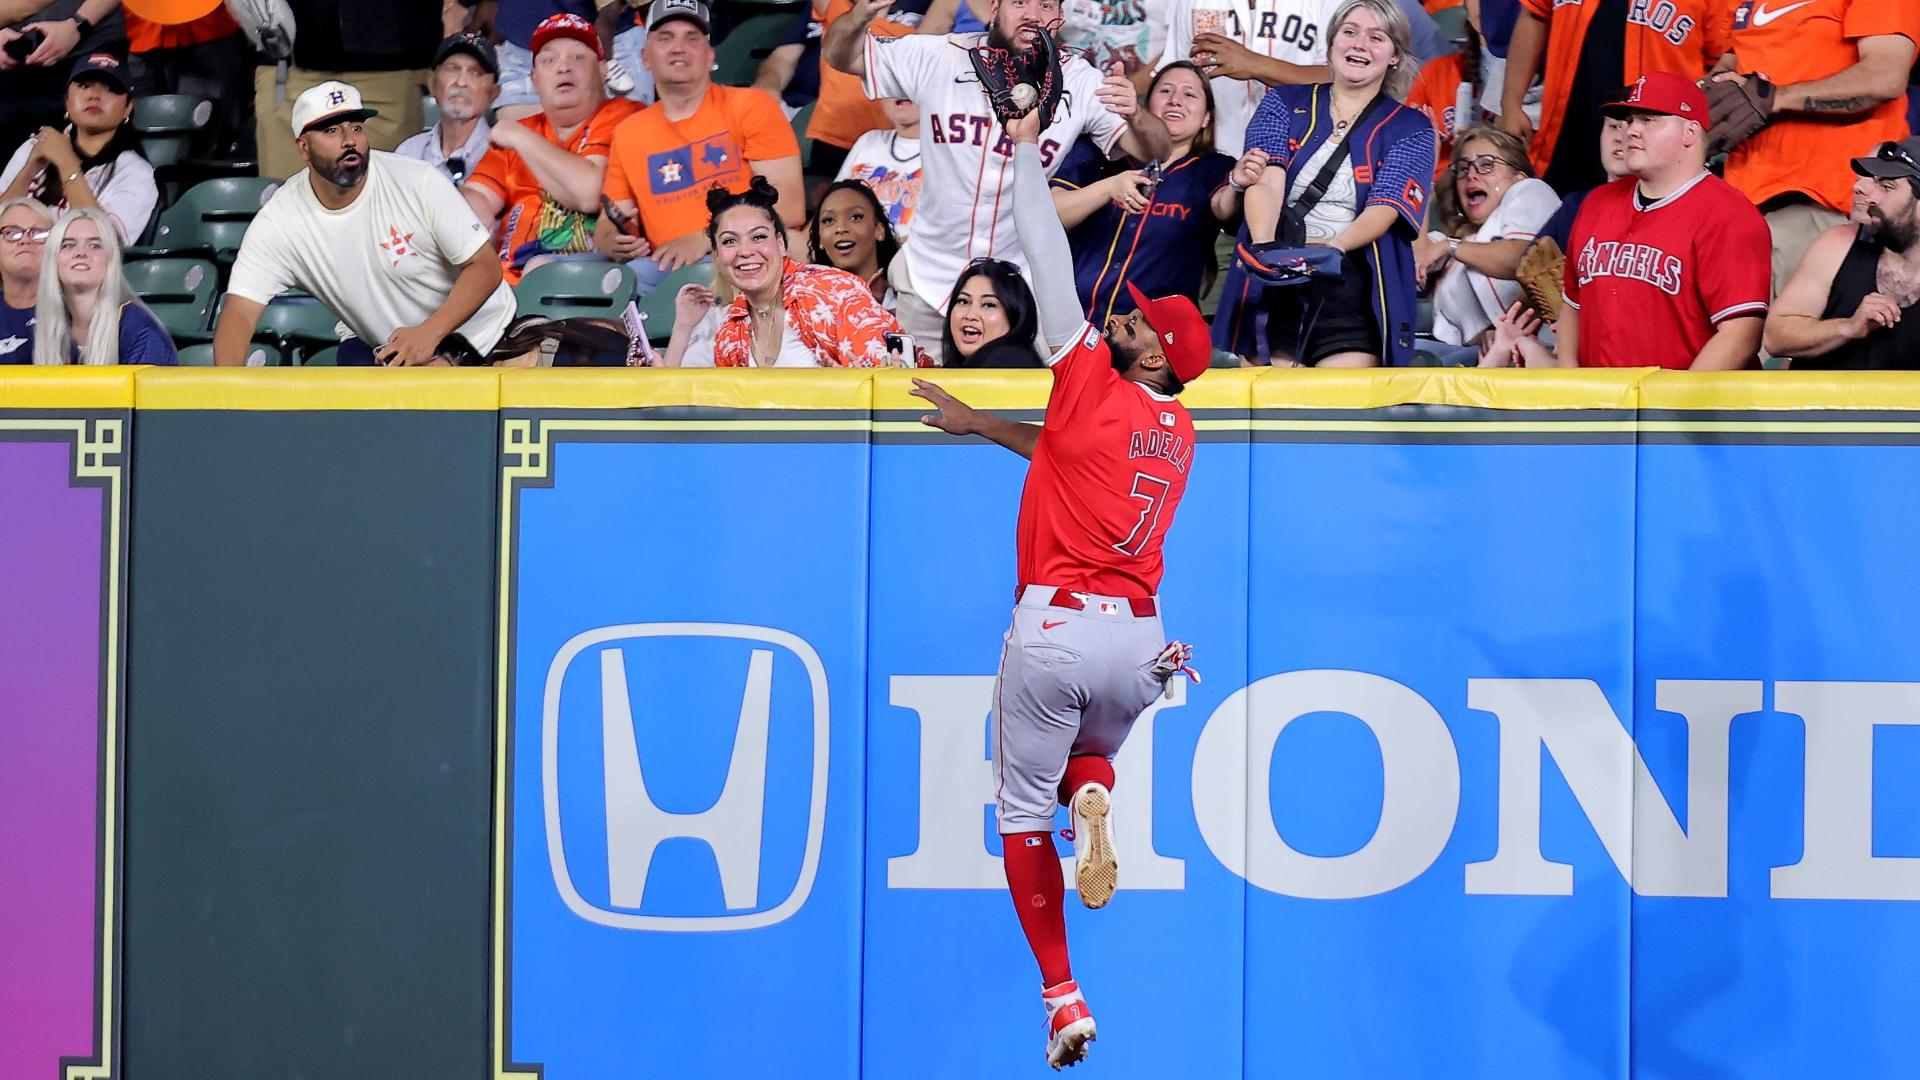 Schanuel  O Hoppe  Adell all homer in 7-run fifth to give Angels 9-7 win over Astros